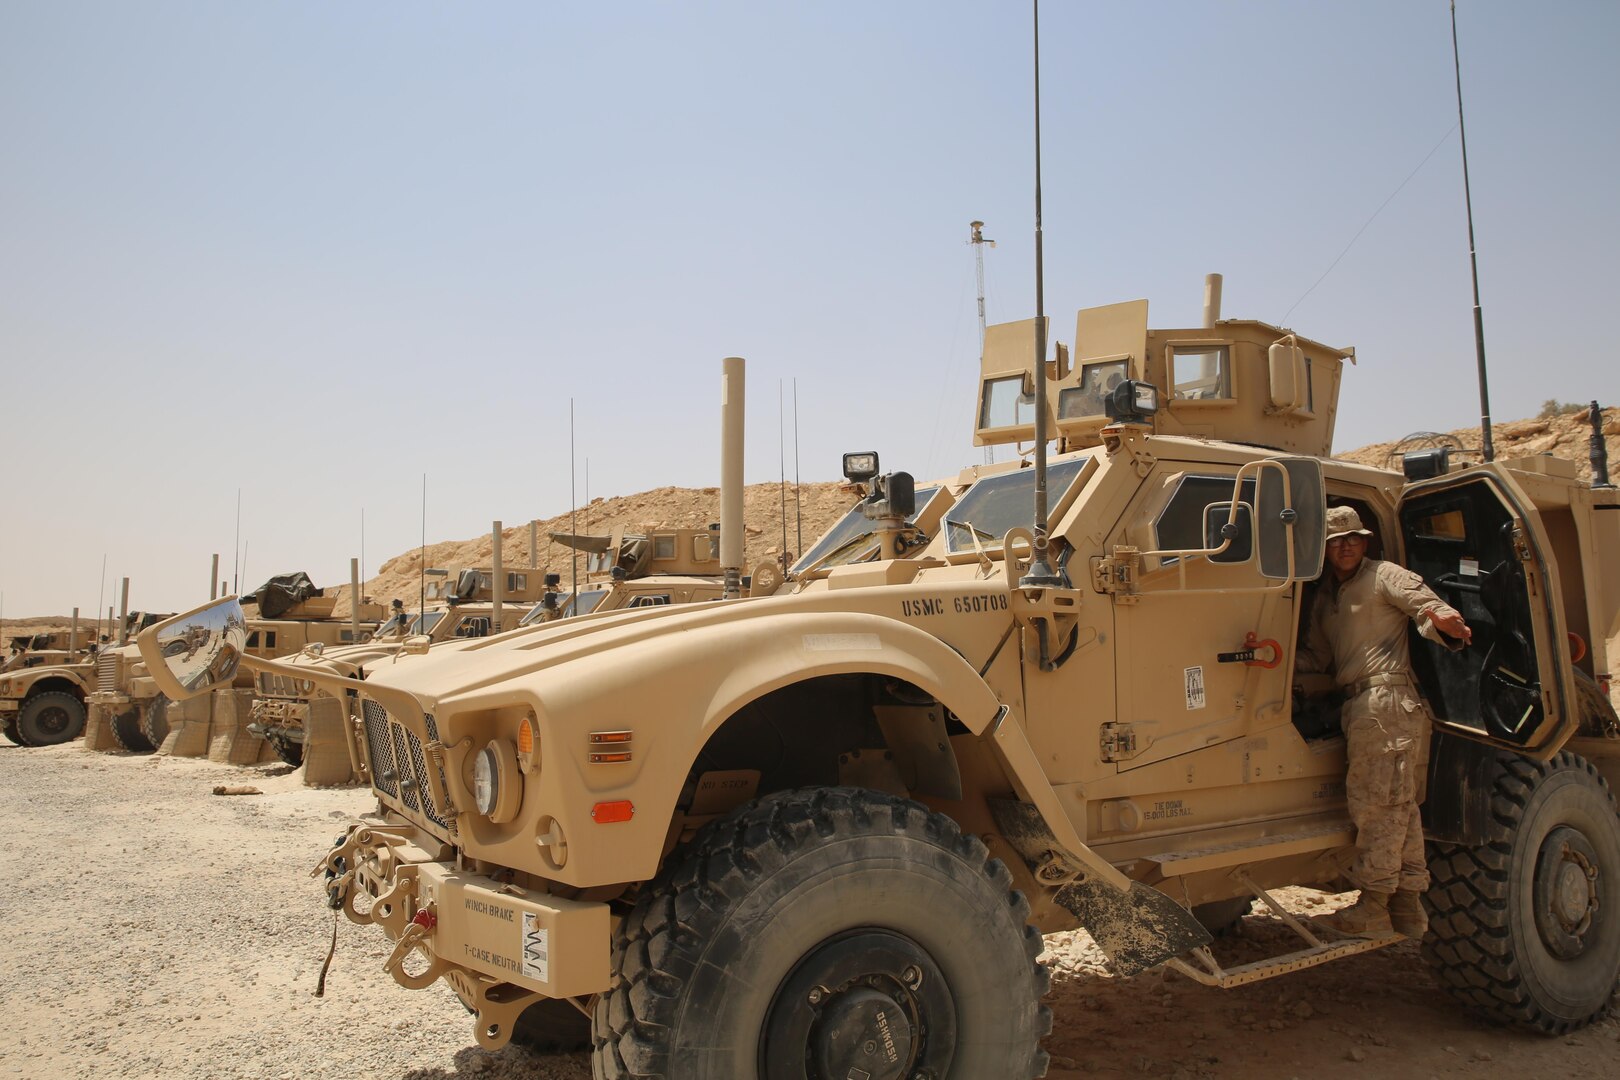 U.S. Marine Corps Lance Cpl. Johnny Perez, a mortarman assigned to Task Force Al Asad, with 1st Battalion, 7th Marines, Special Purpose Marine Air-Ground Task Force-Crisis Response-Central Command, loads gear into a mine-resistant, ambush-protected all-terrain vehiclewhile at Al Asad Air Base, Iraq, July 5, 2017. These Marines are part of the Task Force’s coalition security force team in charge of providing security to the base and personnel onboard. Task Force Al Asad’s mission is to advise and assist and build partner capacity with the Iraqi Security Forces in Al Anbar province in support of Combined Joint Task Force-Operation Inherent Resolve, the global coalition to defeat ISIS in Iraq and Syria. (U.S. Marine Corps photo by 1st Lt. Dave Williams)